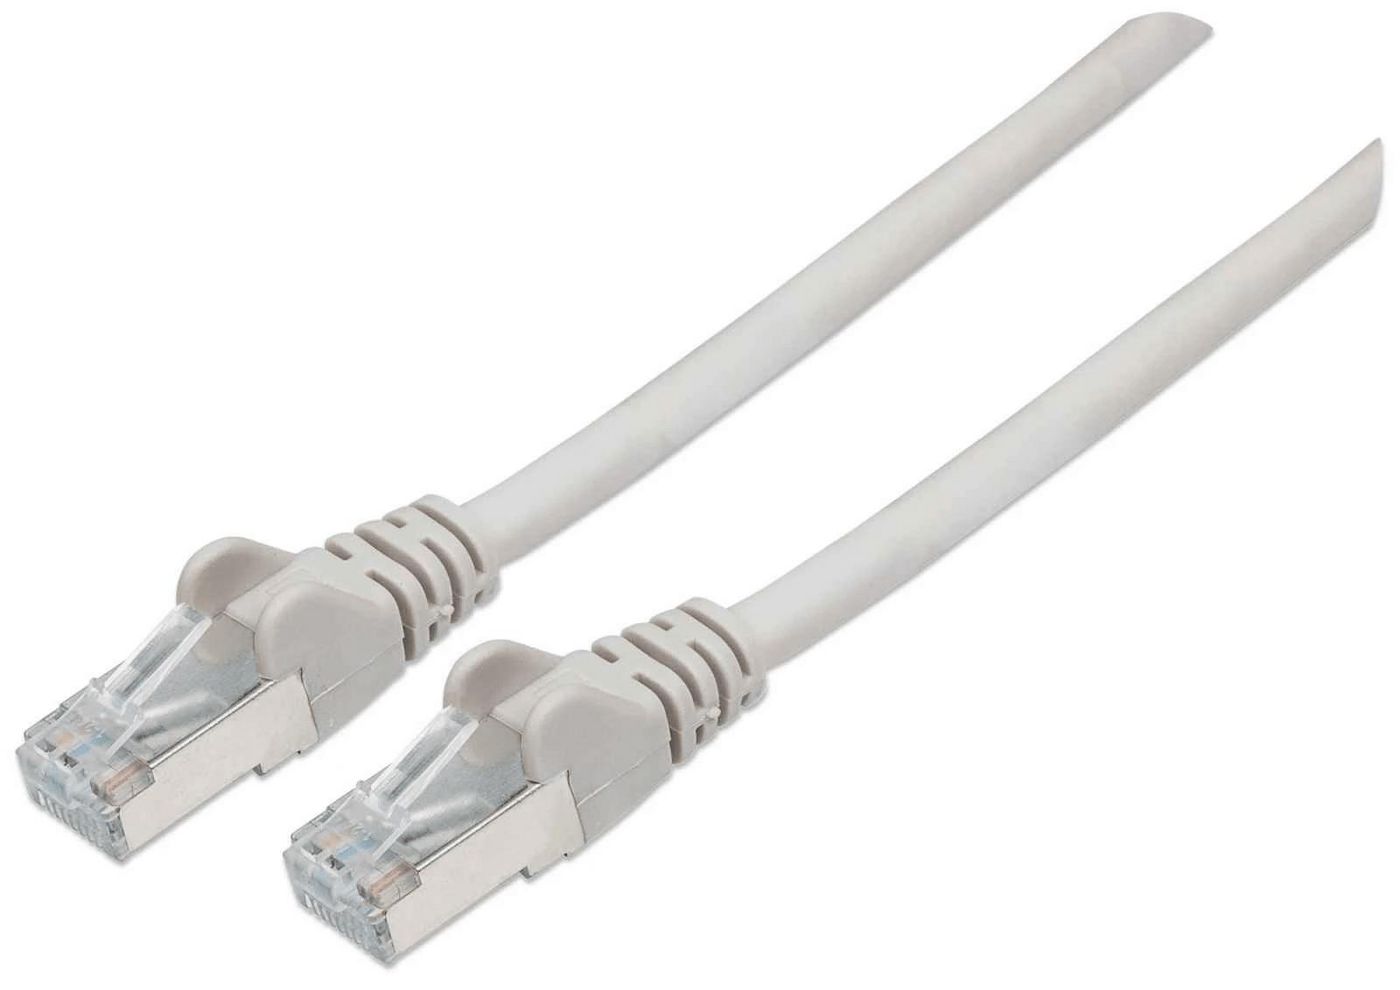 Intellinet 740869 High Performance Network Cable 